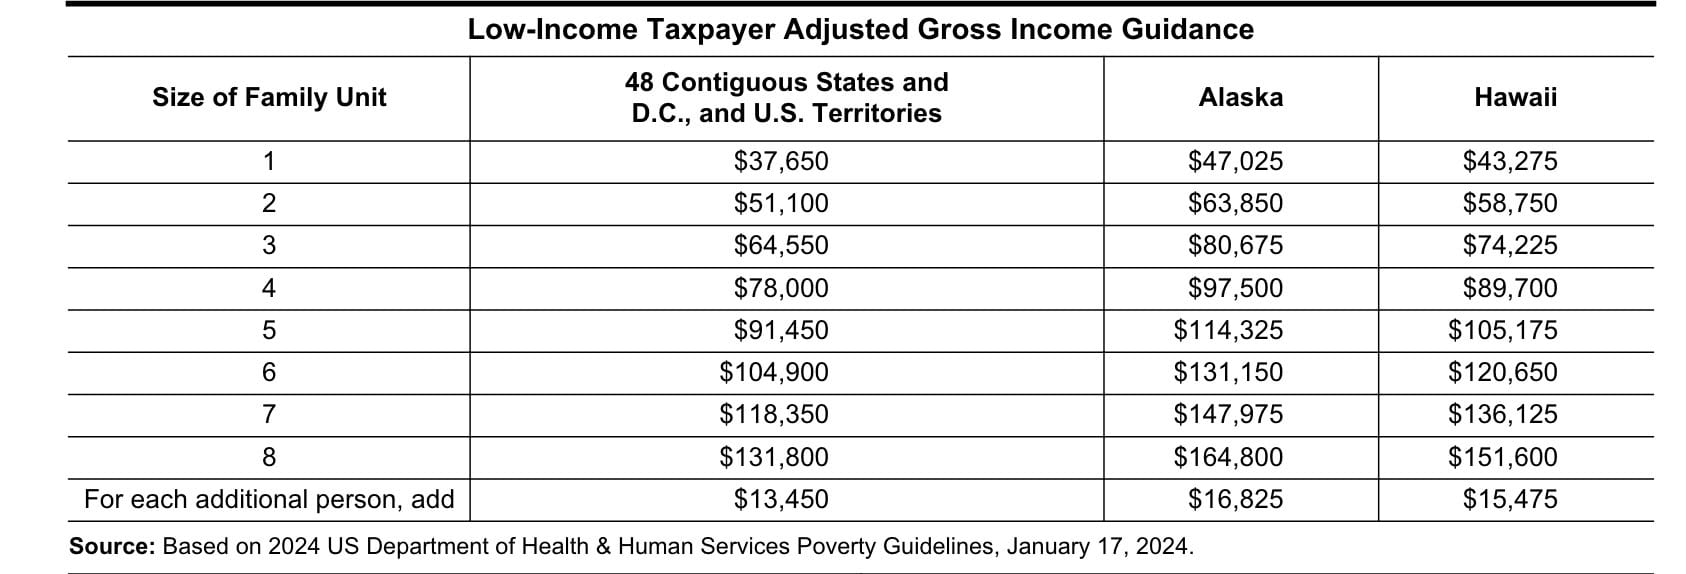 irs form 13833, low-income taxpayer adjusted gross income guidance (2024)